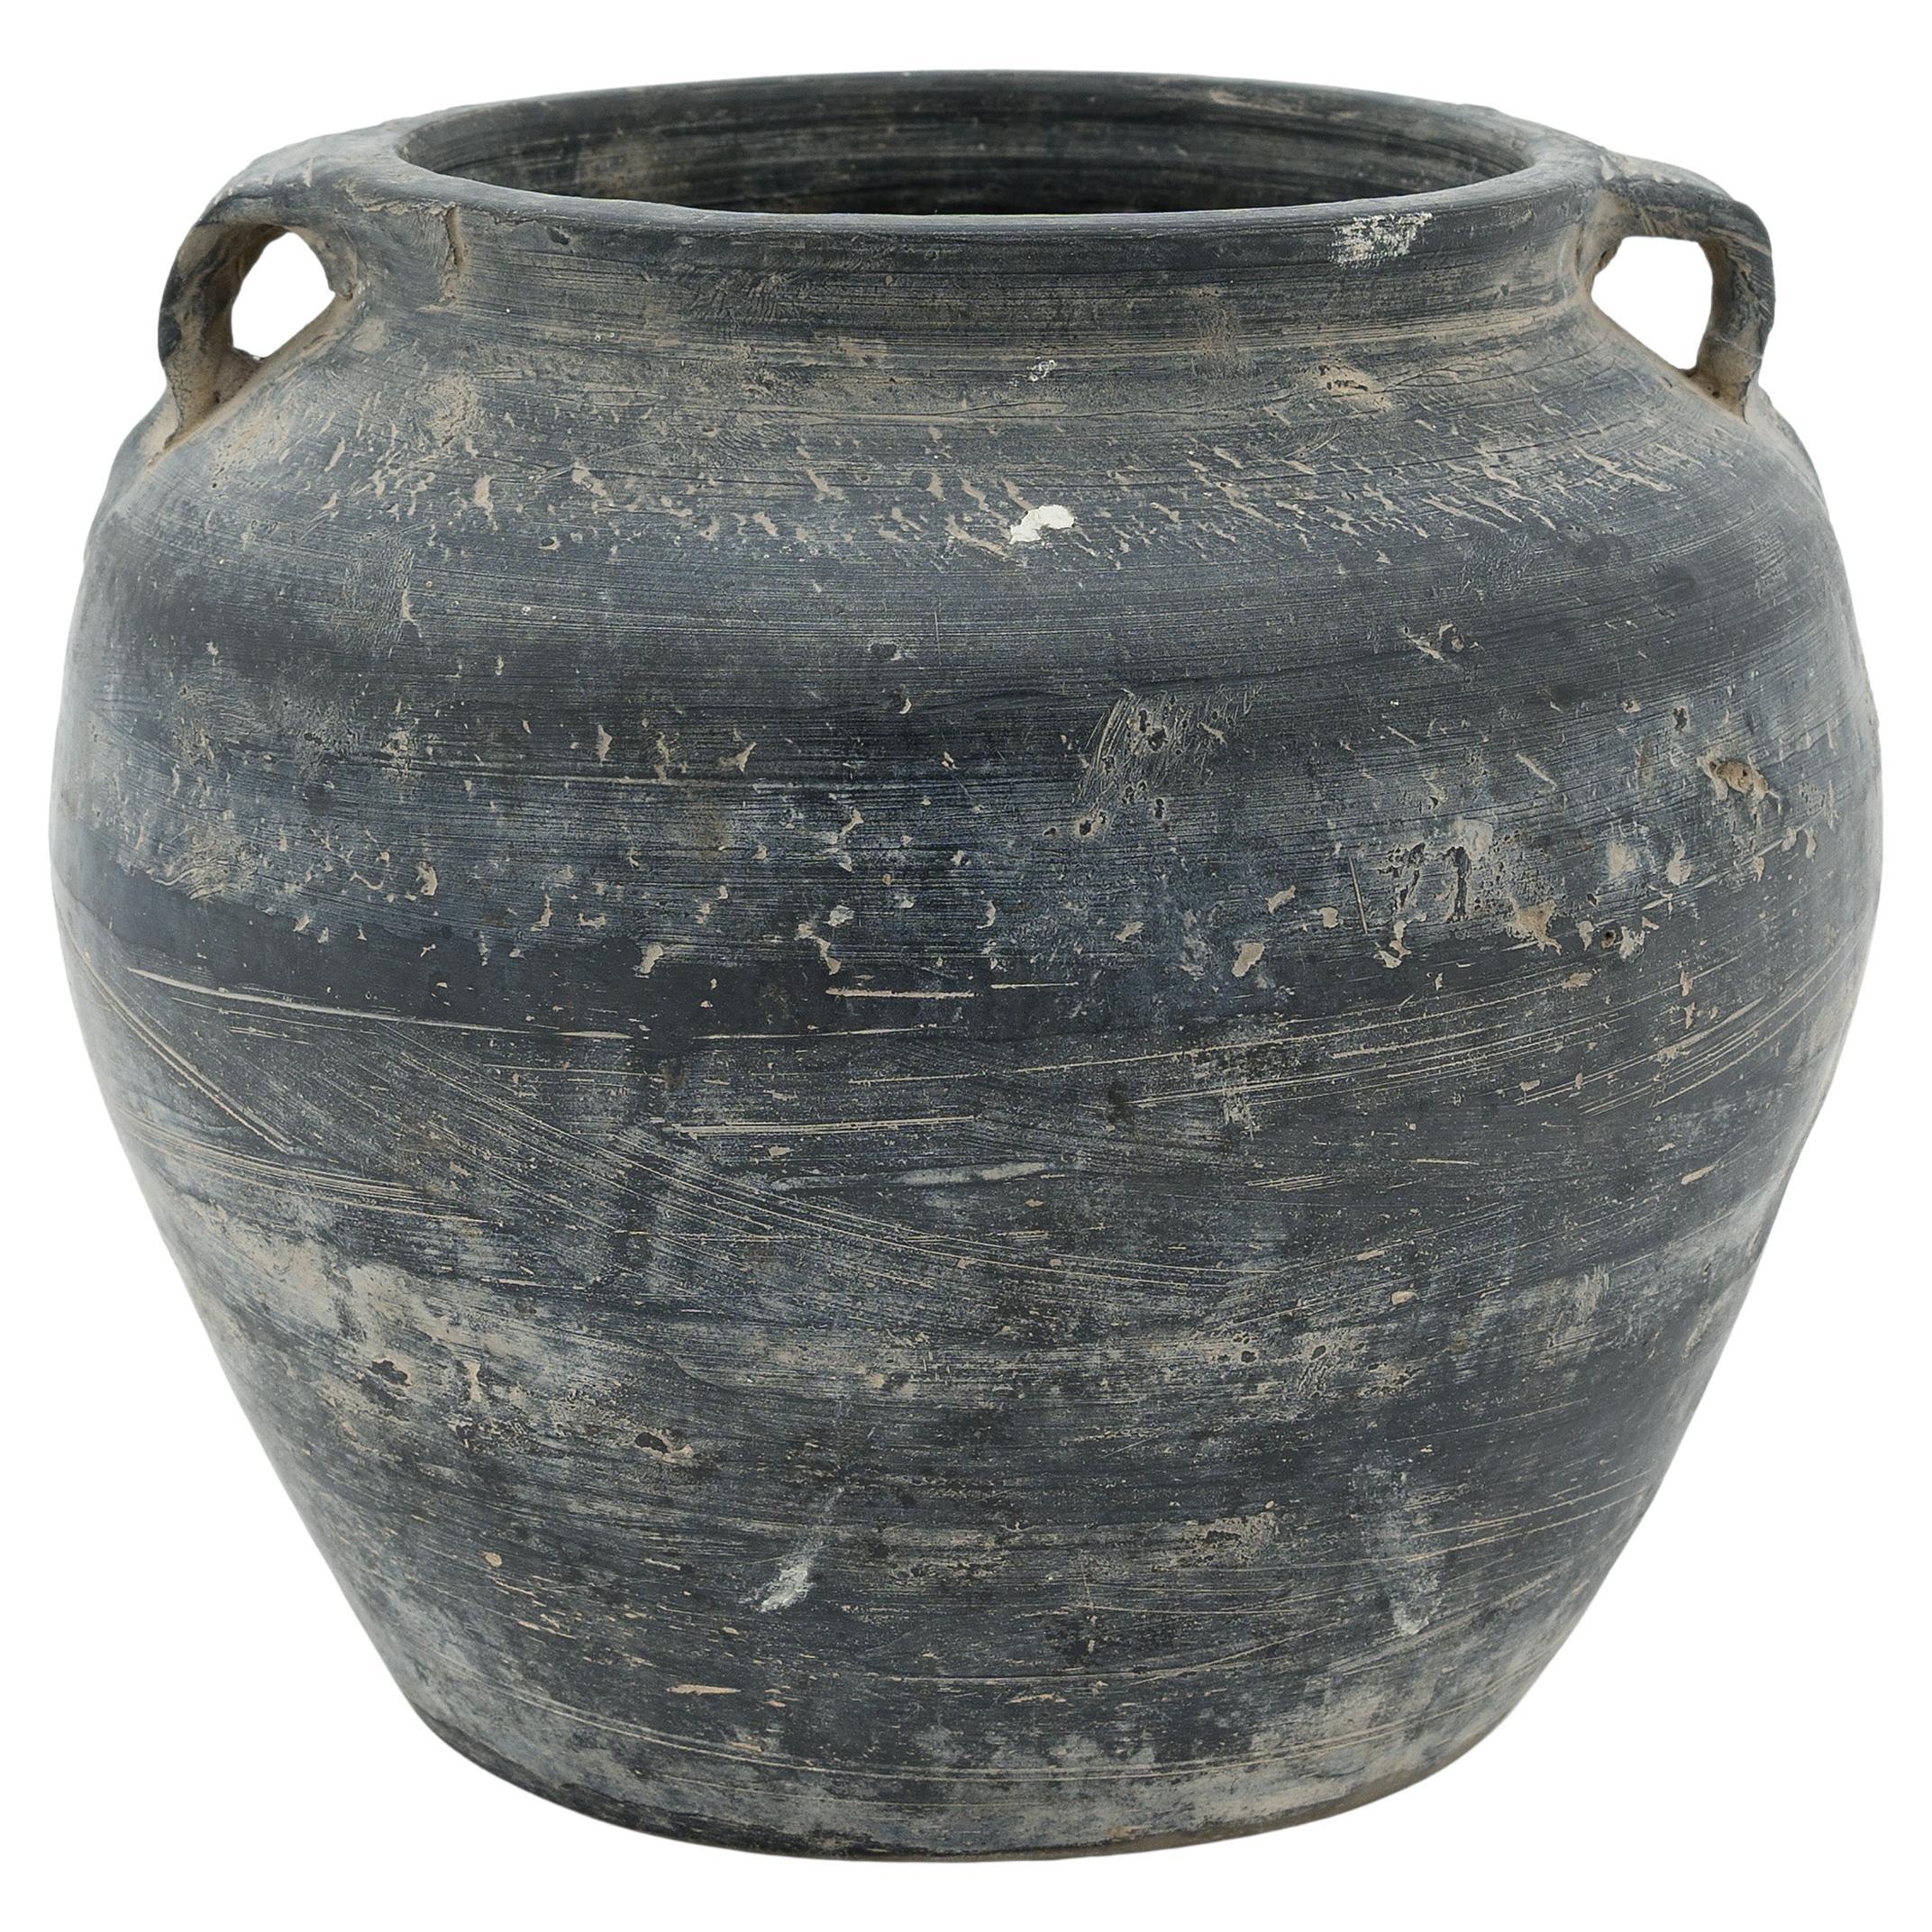 Chinese Lobed Pantry Vessel, c. 1900